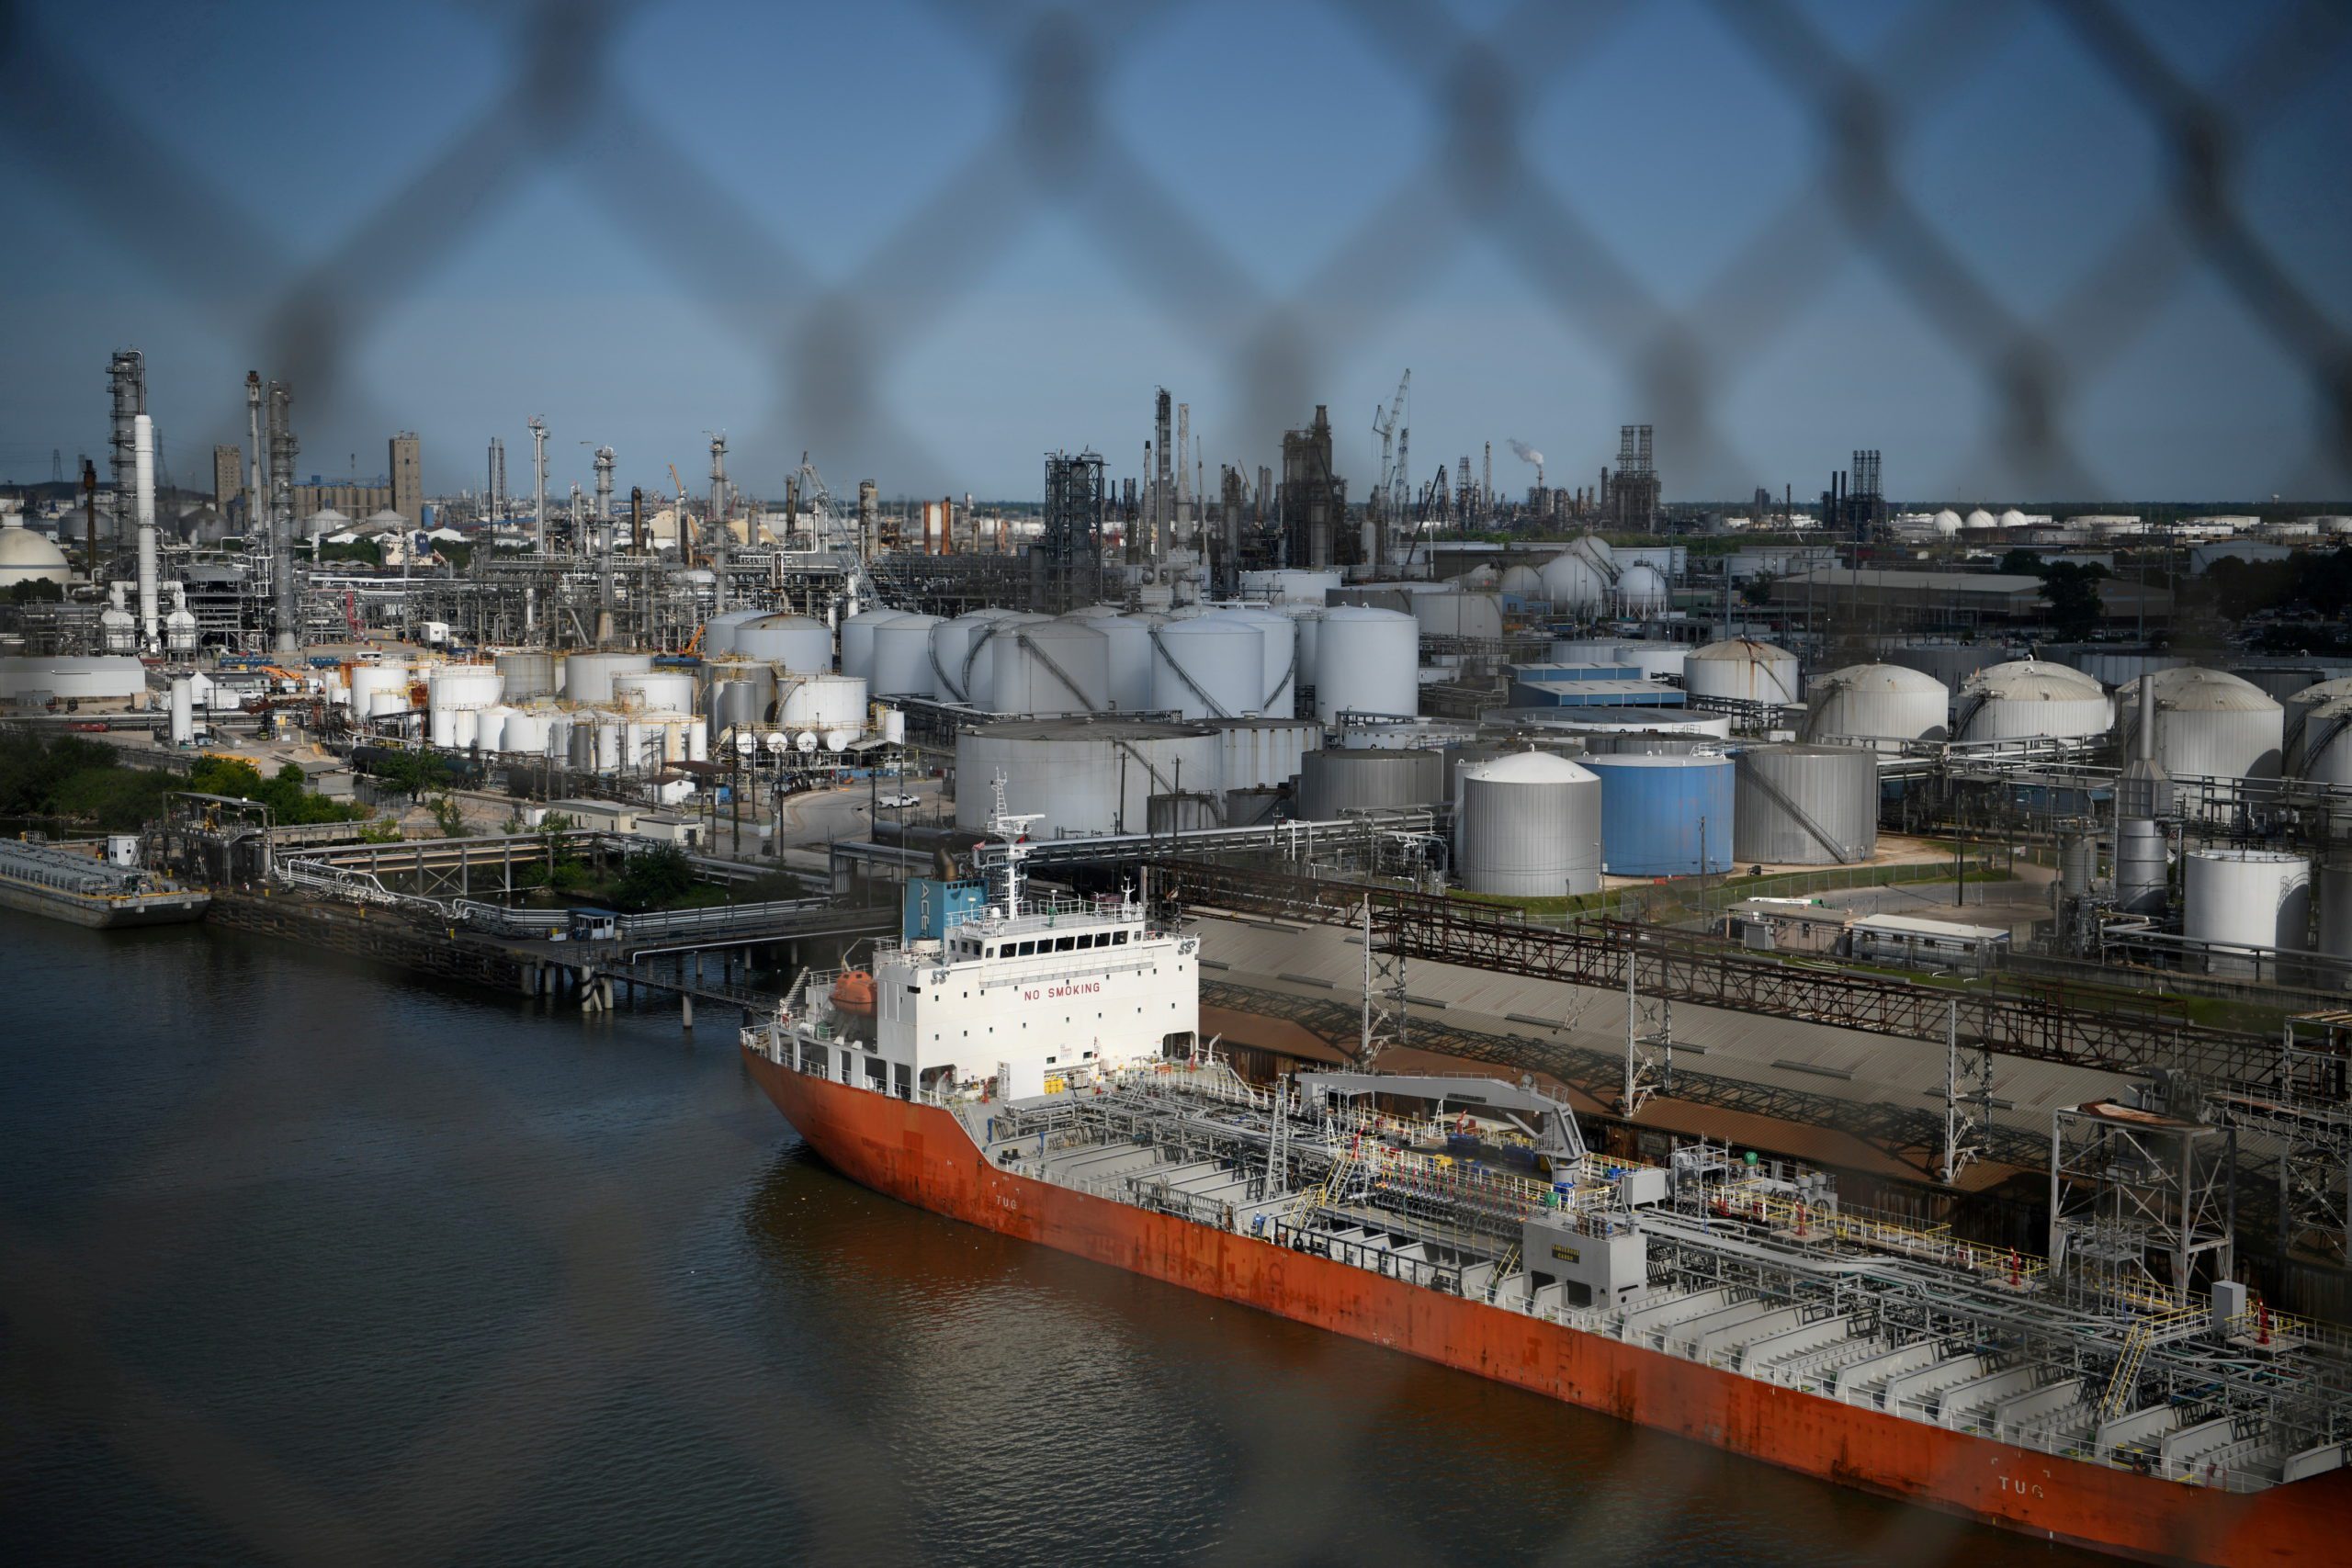 Bunker Fuel Contamination Uncovered in Houston, Texas